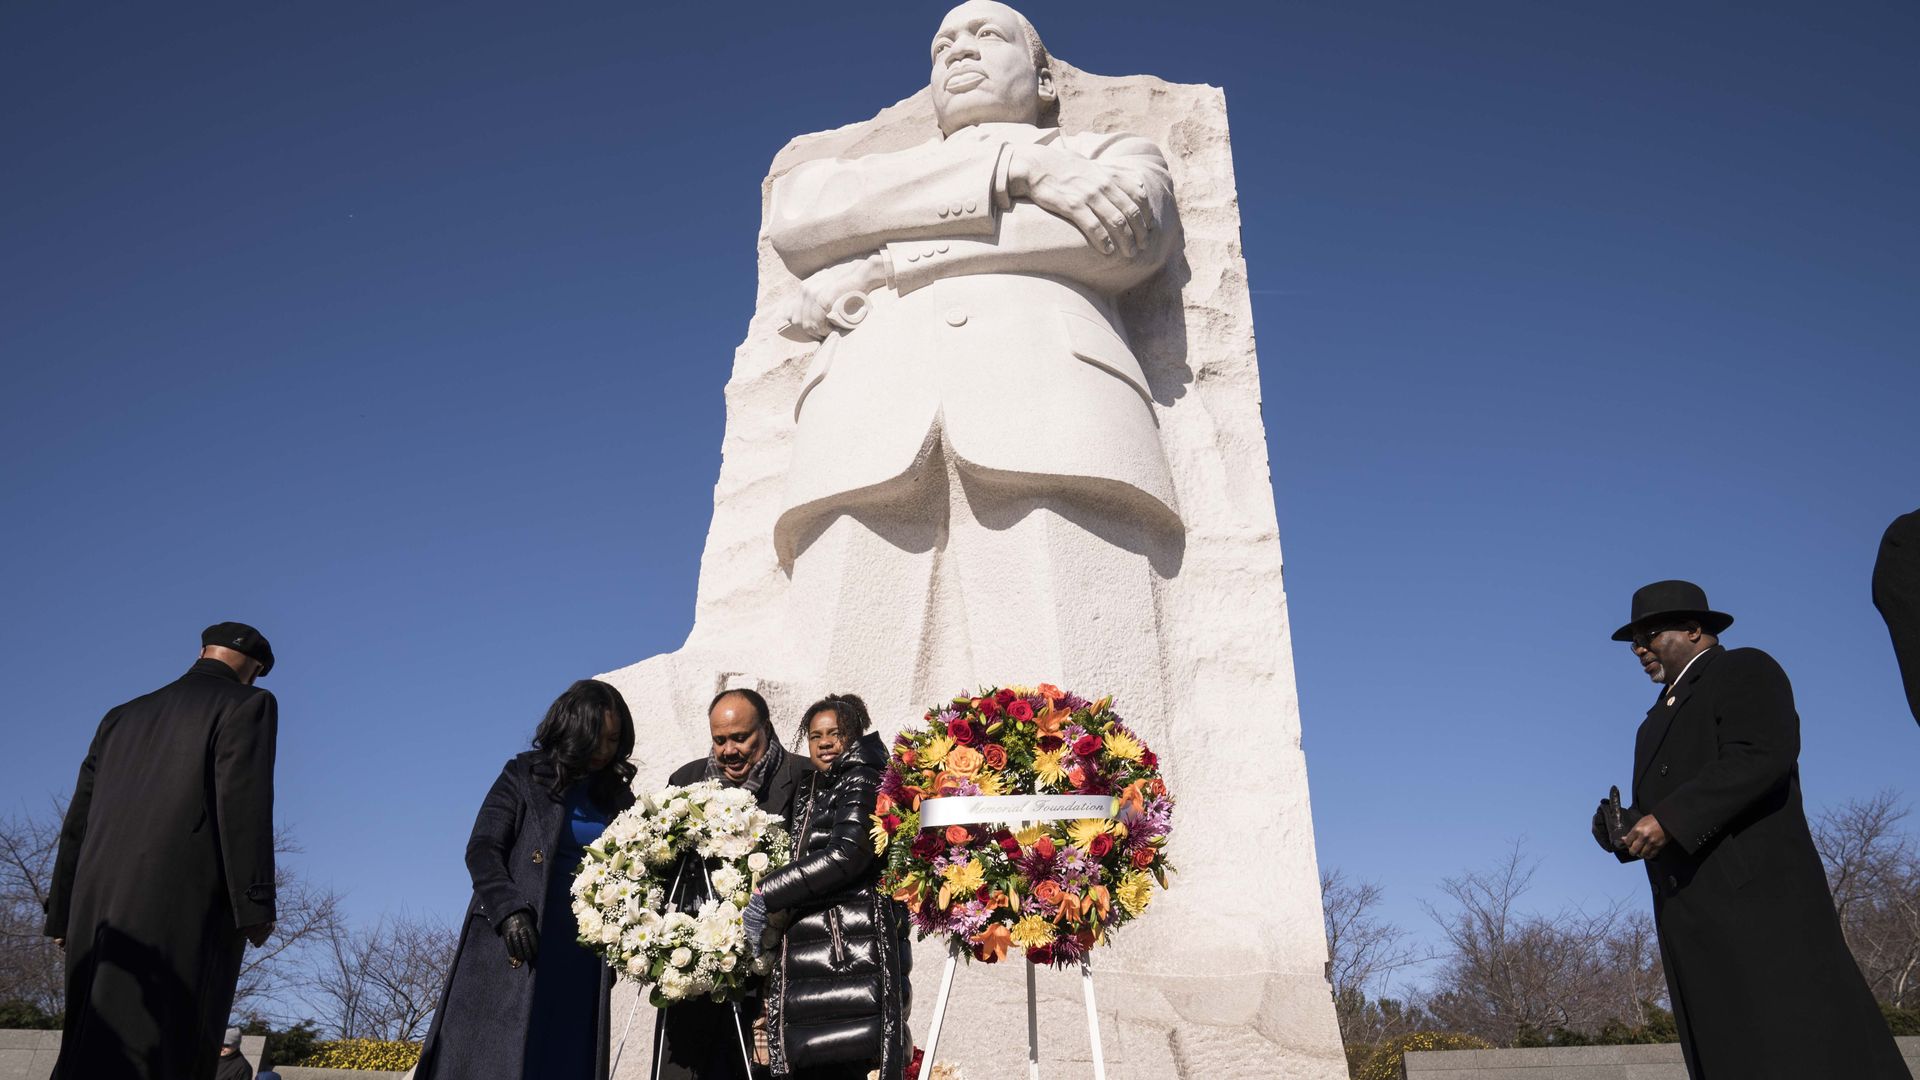 Dr. Martin Luther King, Jr.'s son, Martin Luther King III, his wife Arndrea Waters King and their daughter Yolanda Renee King visit the Martin Luther King Jr. Memorial 